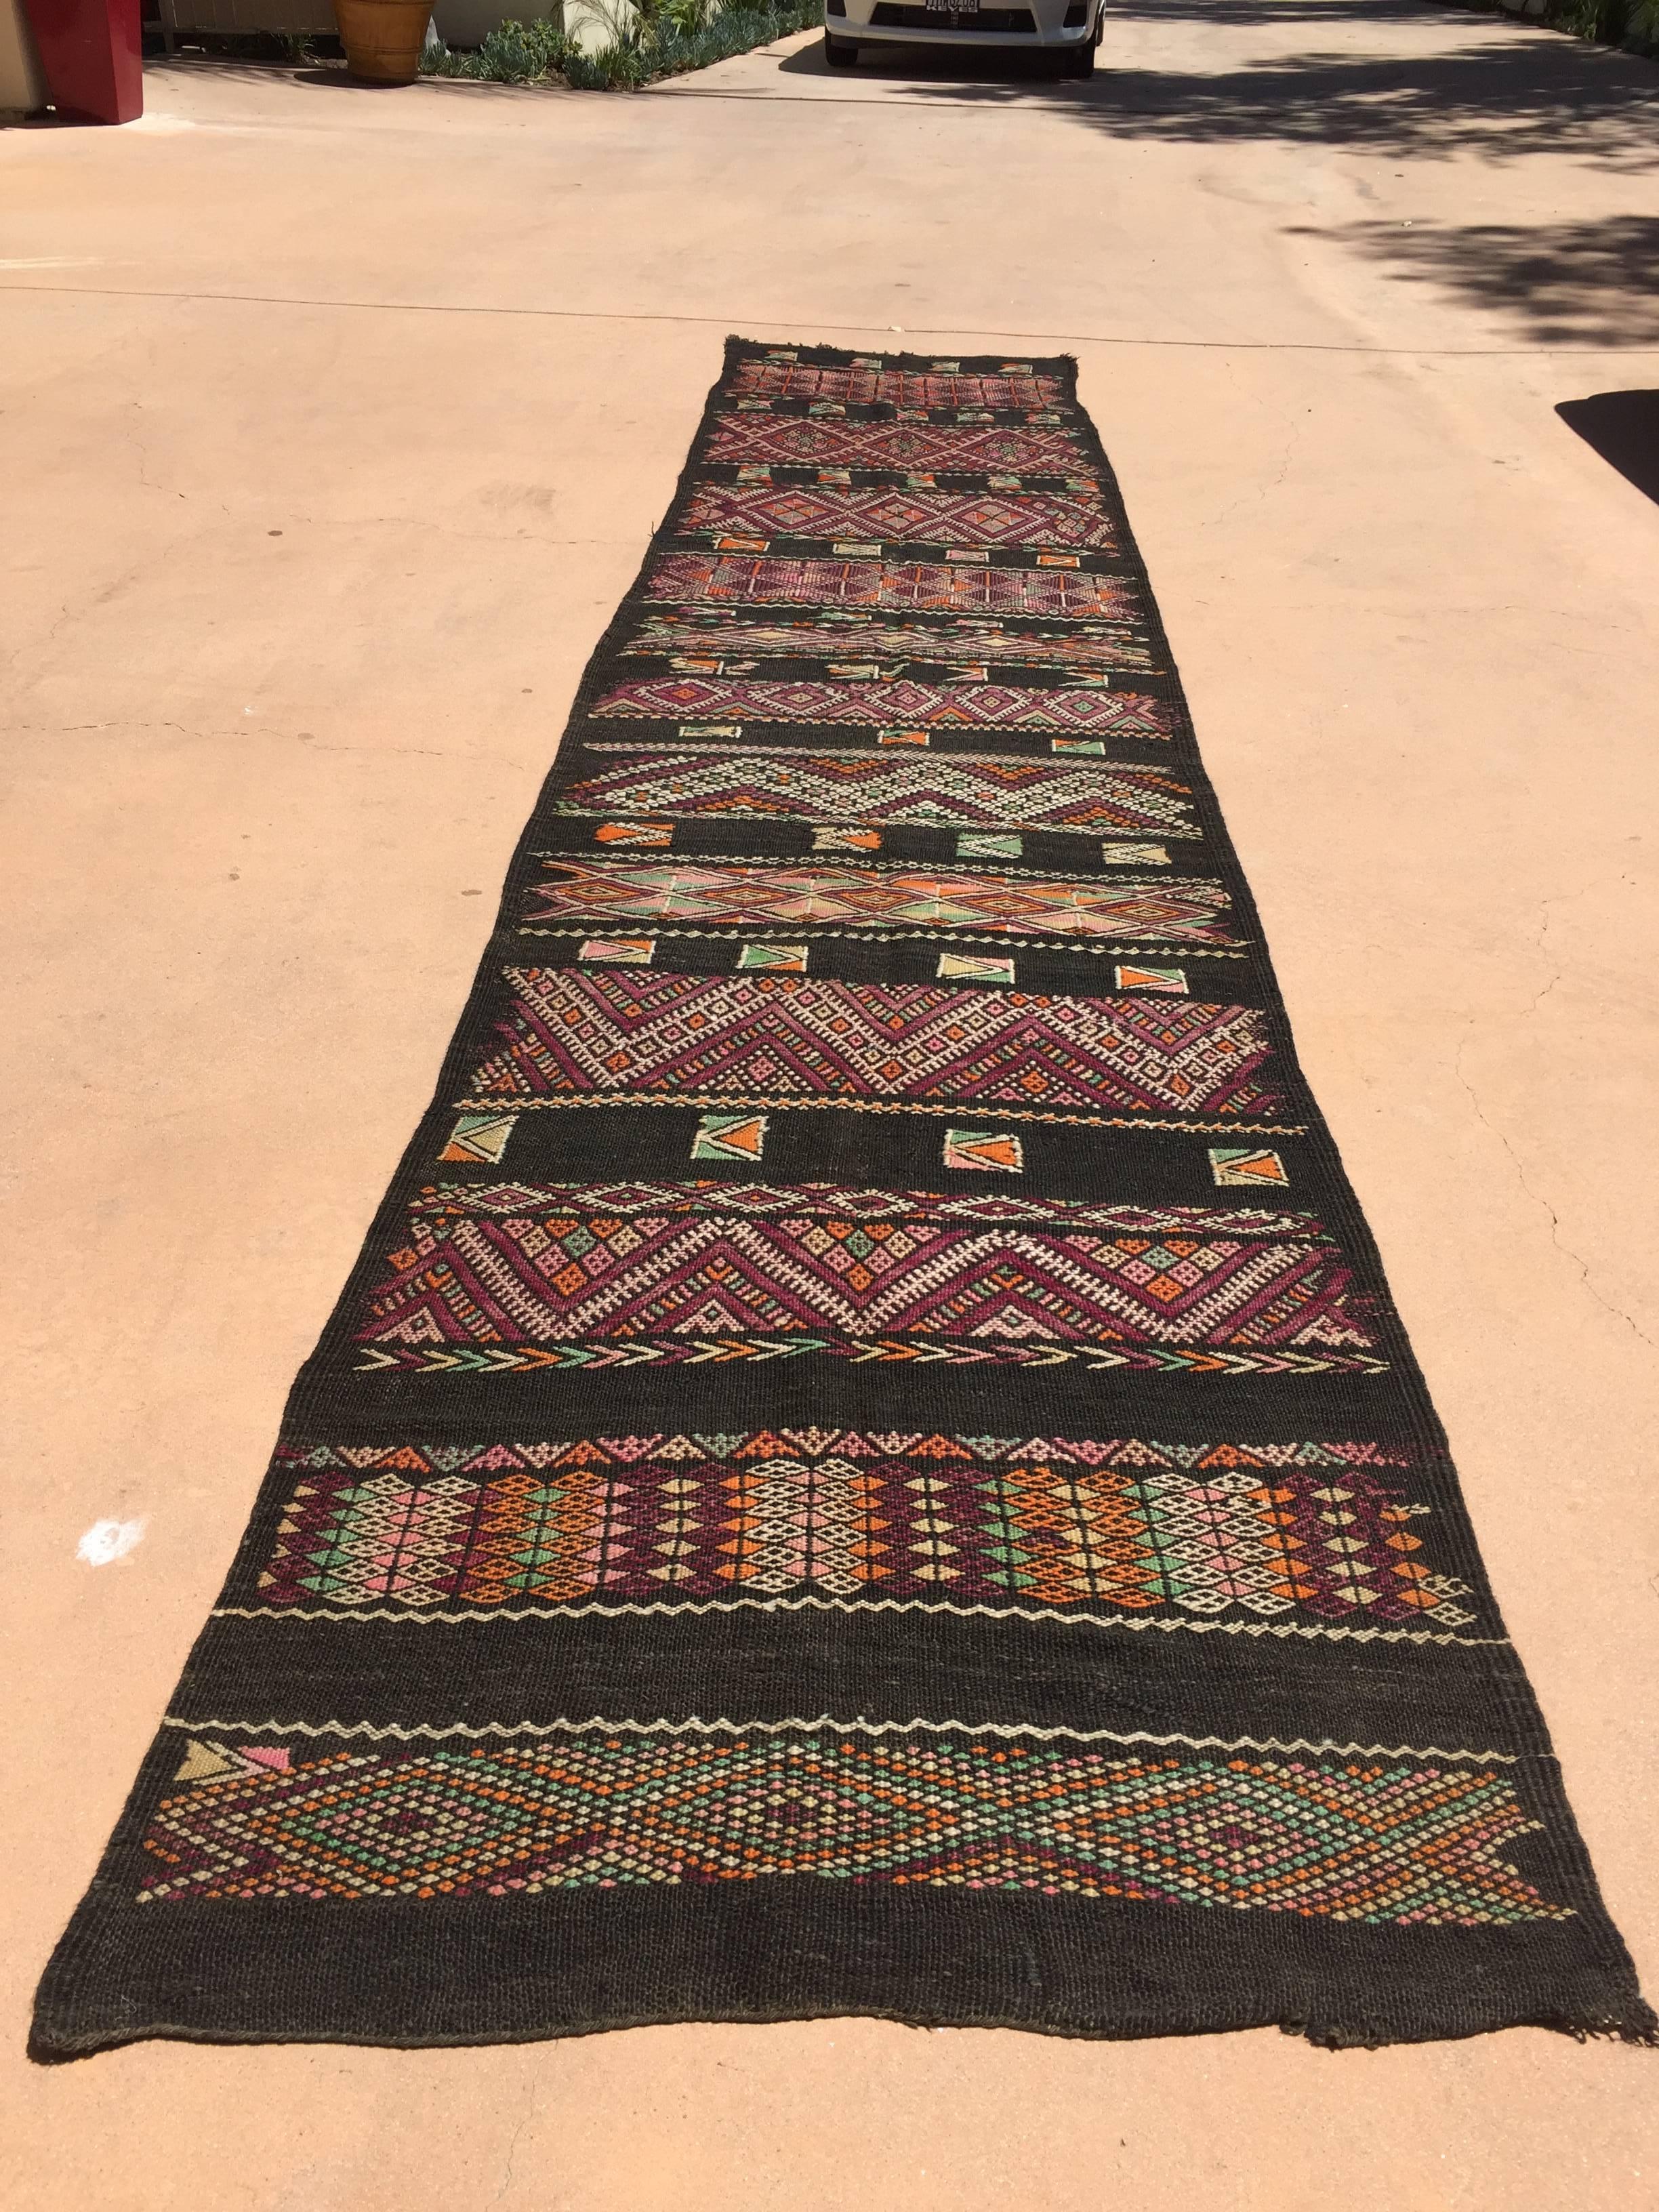 Vintage Moroccan Nomadic rug, black camel hair with wool and cotton embroidered geometrical Modernist designs.
Mid-Century African tribal rug very long runner.
Kilim flat-weave.
This rug was used for room separation in the Berber tents, those